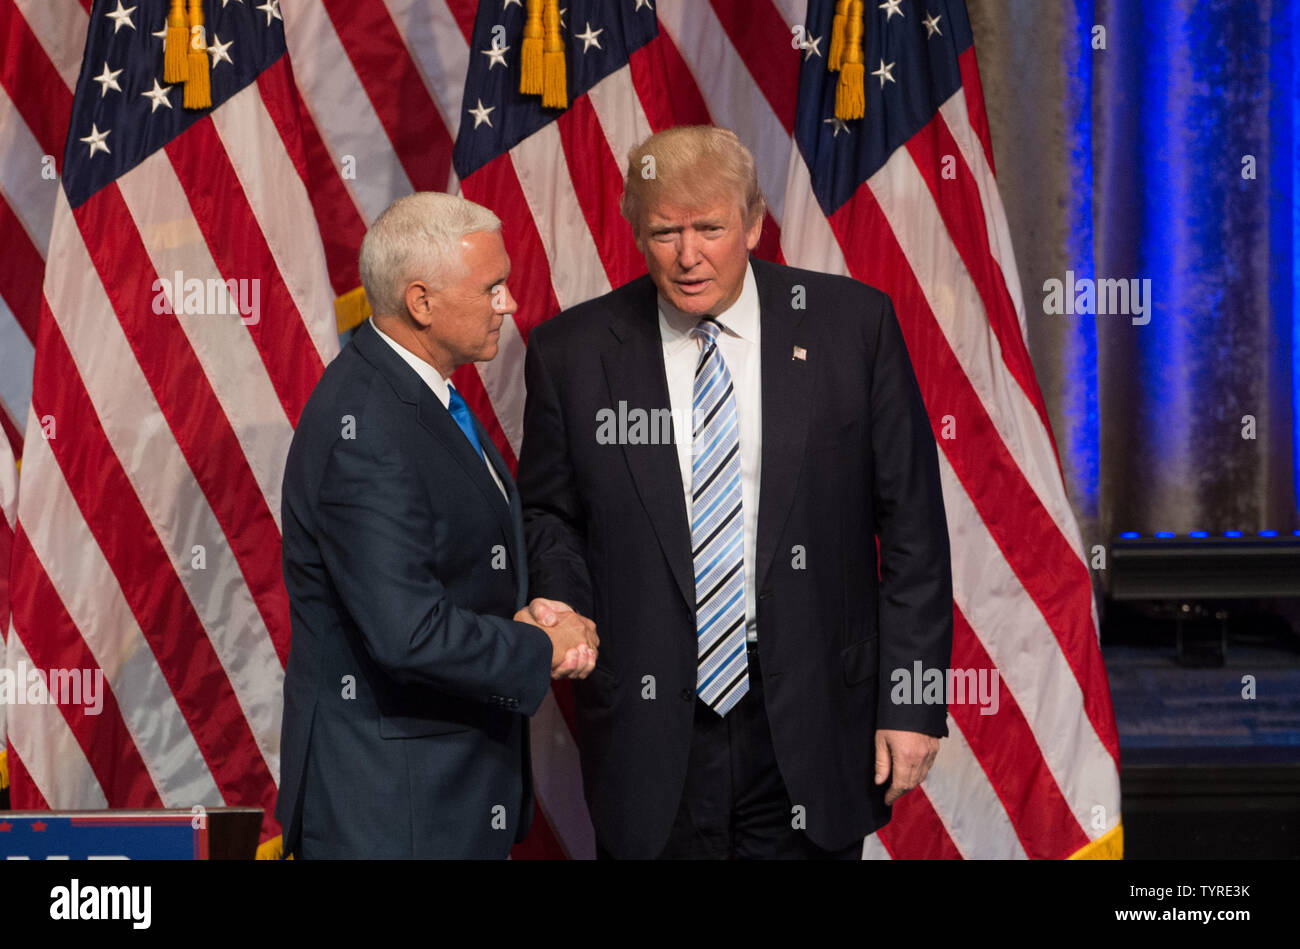 Presumptive Republican nominee for President Donald Trump shakes hands with his pick for Vice President, Mike Pence, left, at a press conference at the New York Hilton on July 16, 2016 in New York City. Photo by Bryan R. Smith/UPI Stock Photo